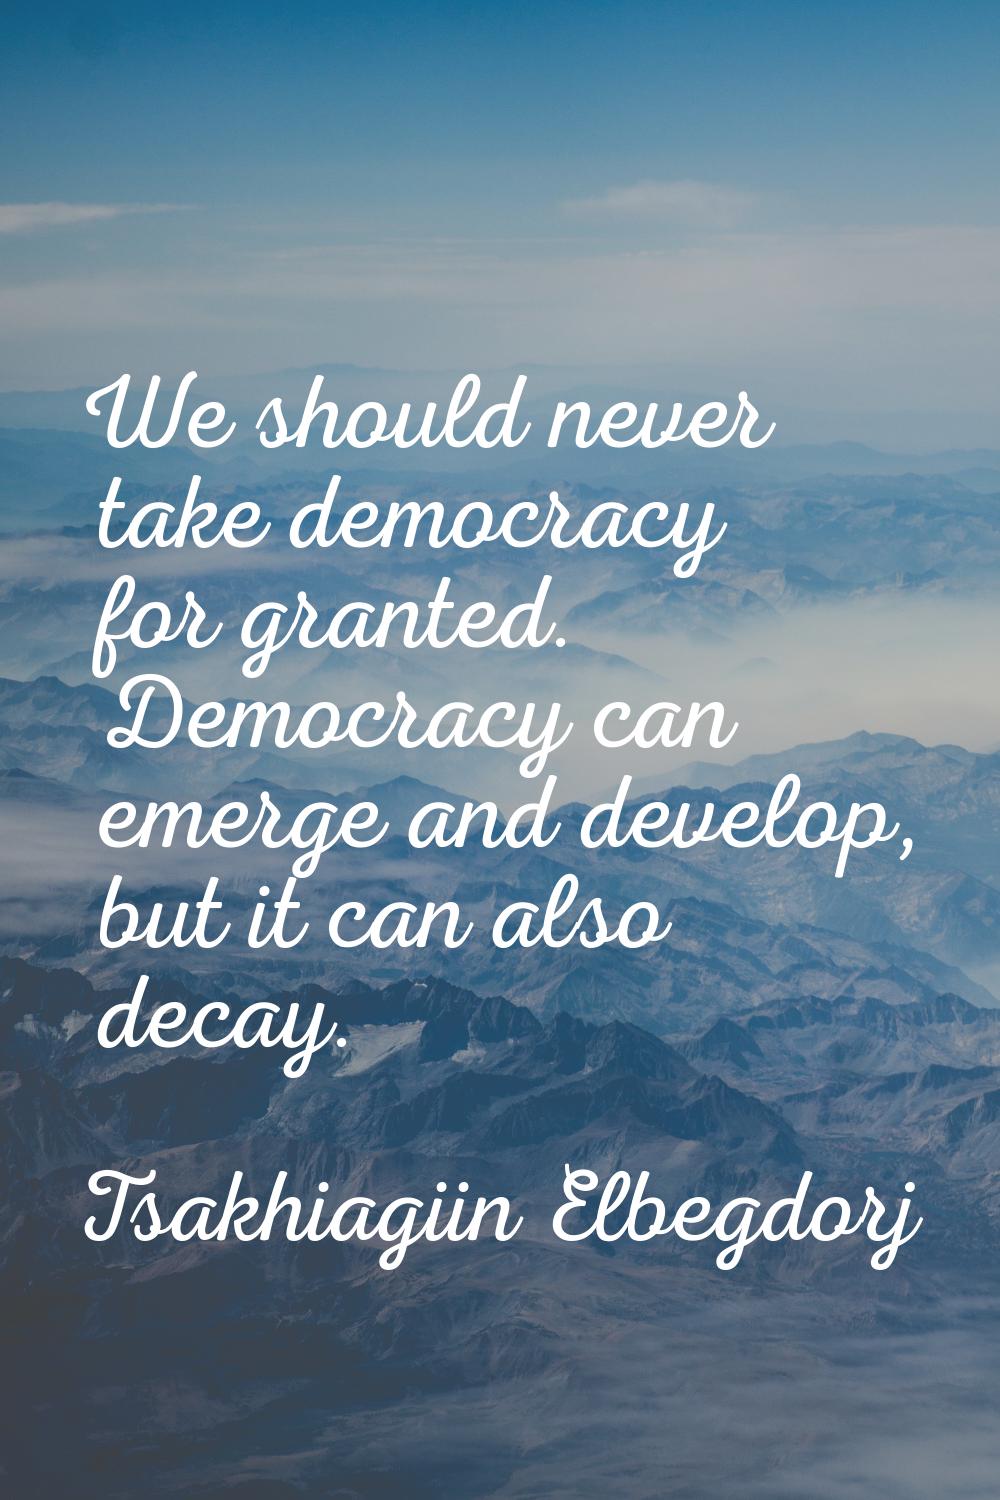 We should never take democracy for granted. Democracy can emerge and develop, but it can also decay